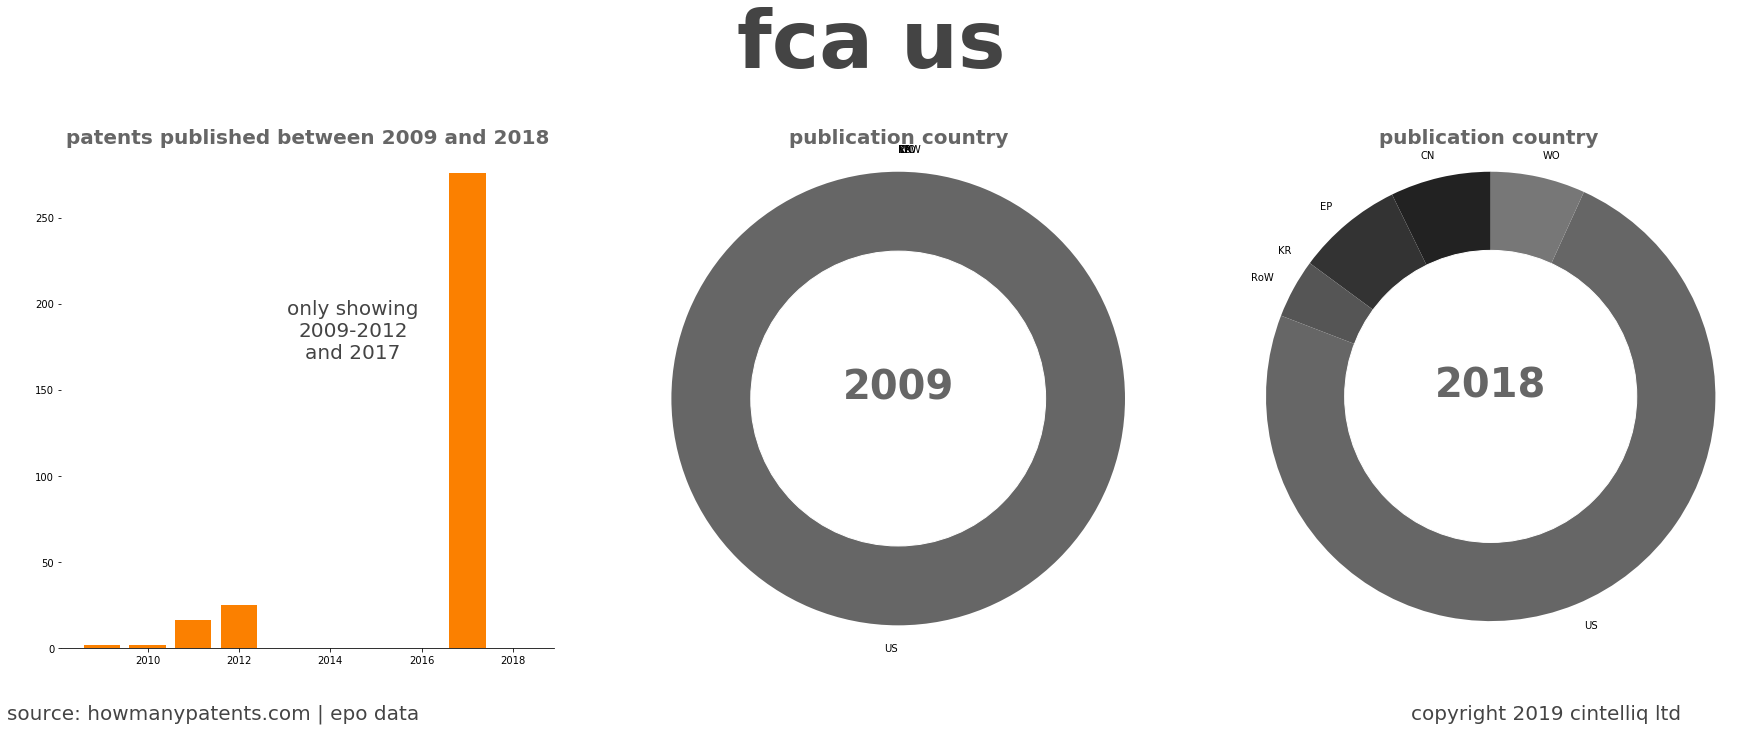 summary of patents for Fca Us